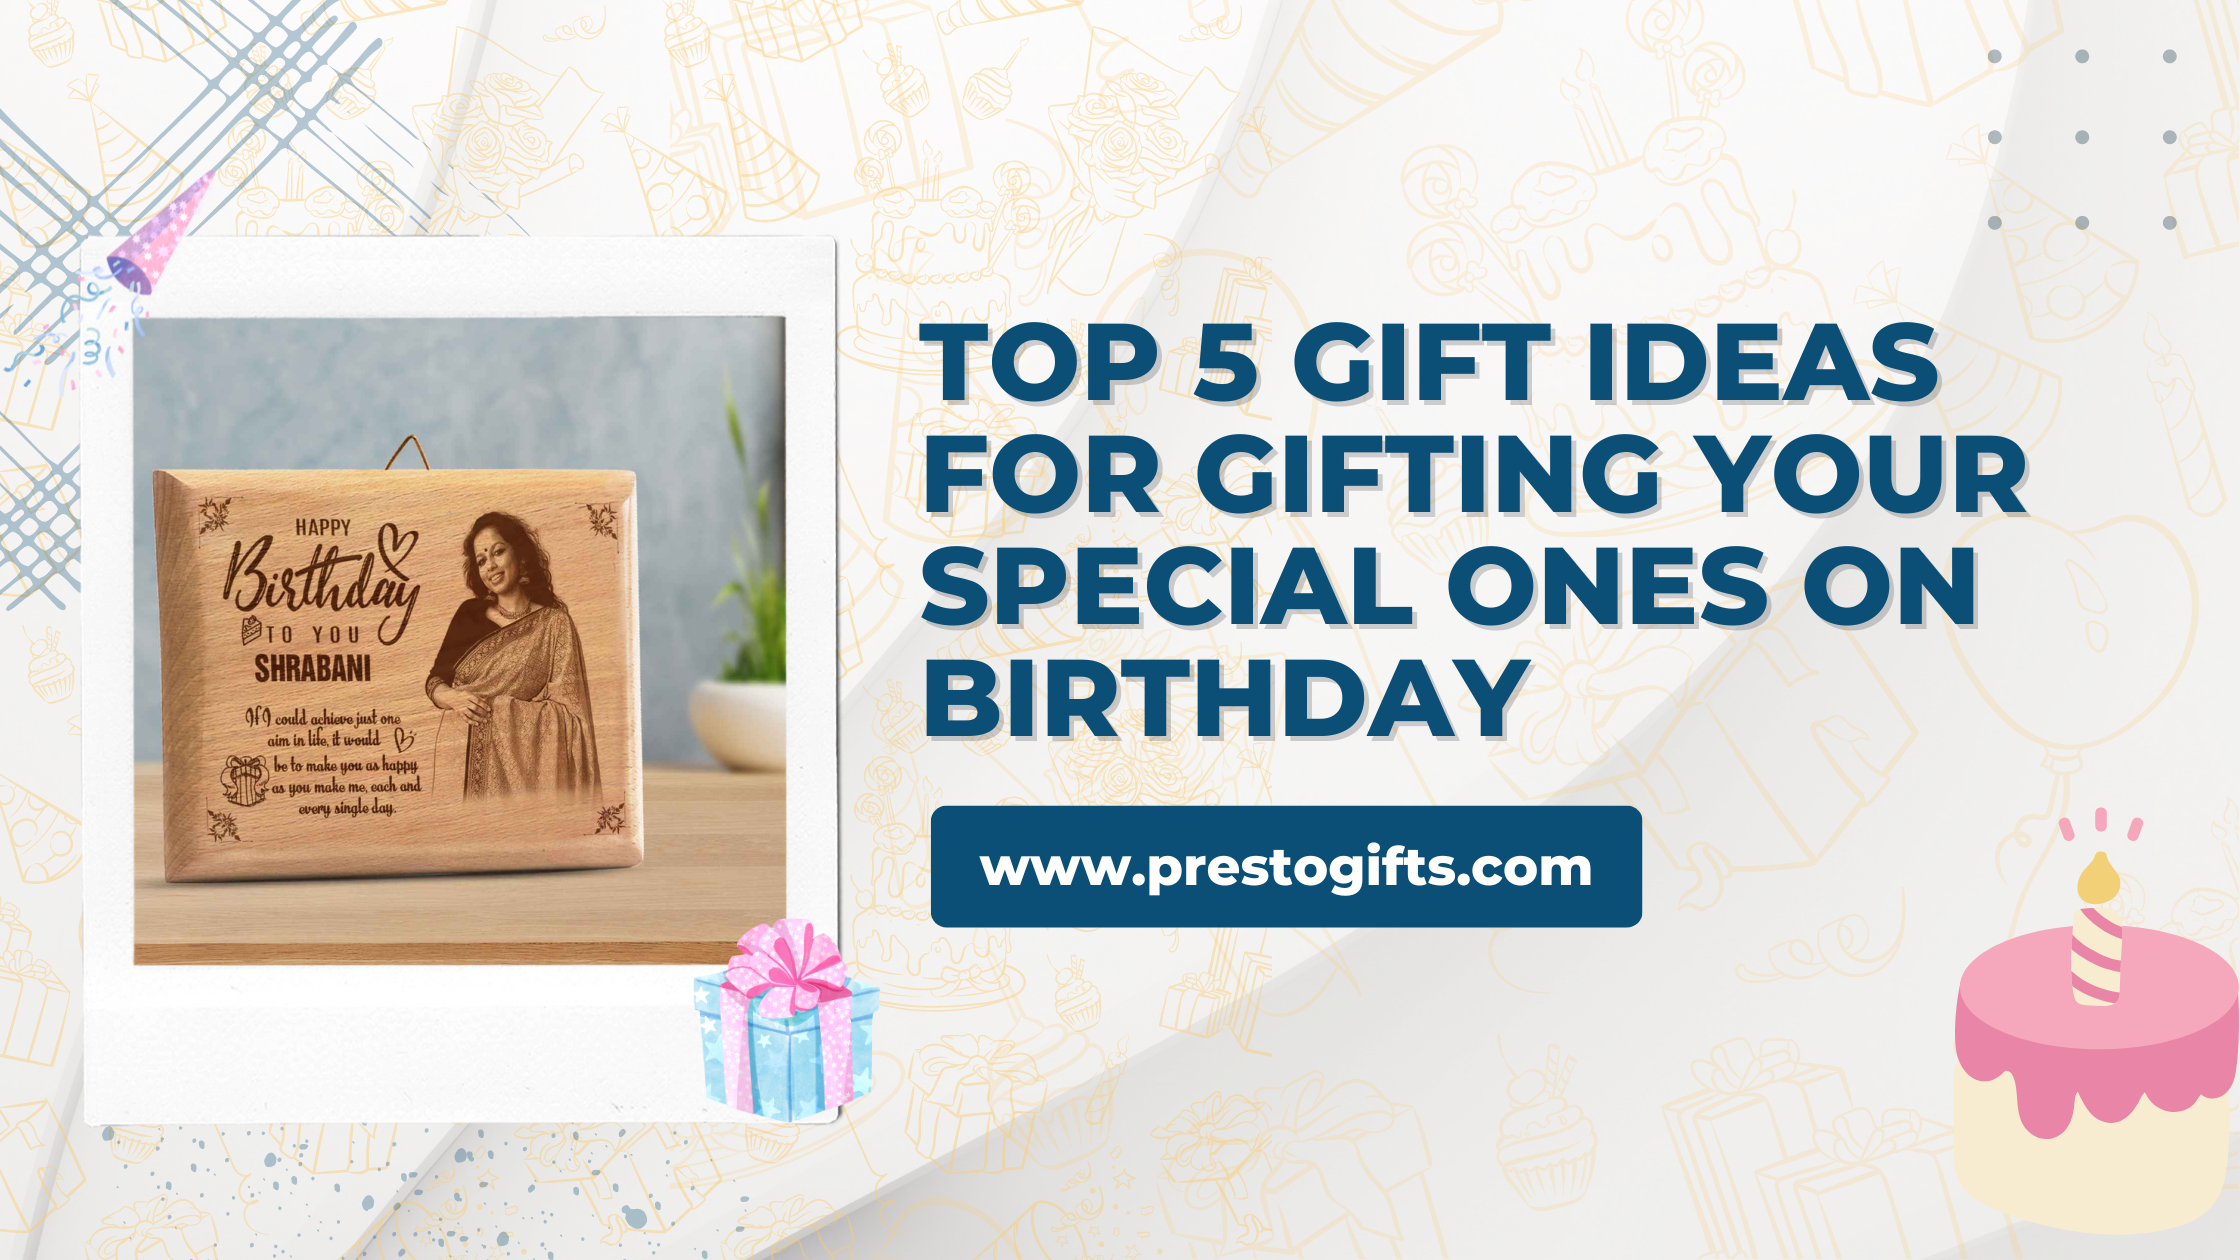 20 Gift Ideas for Your Wife's 60th Birthday - Unique Gifter